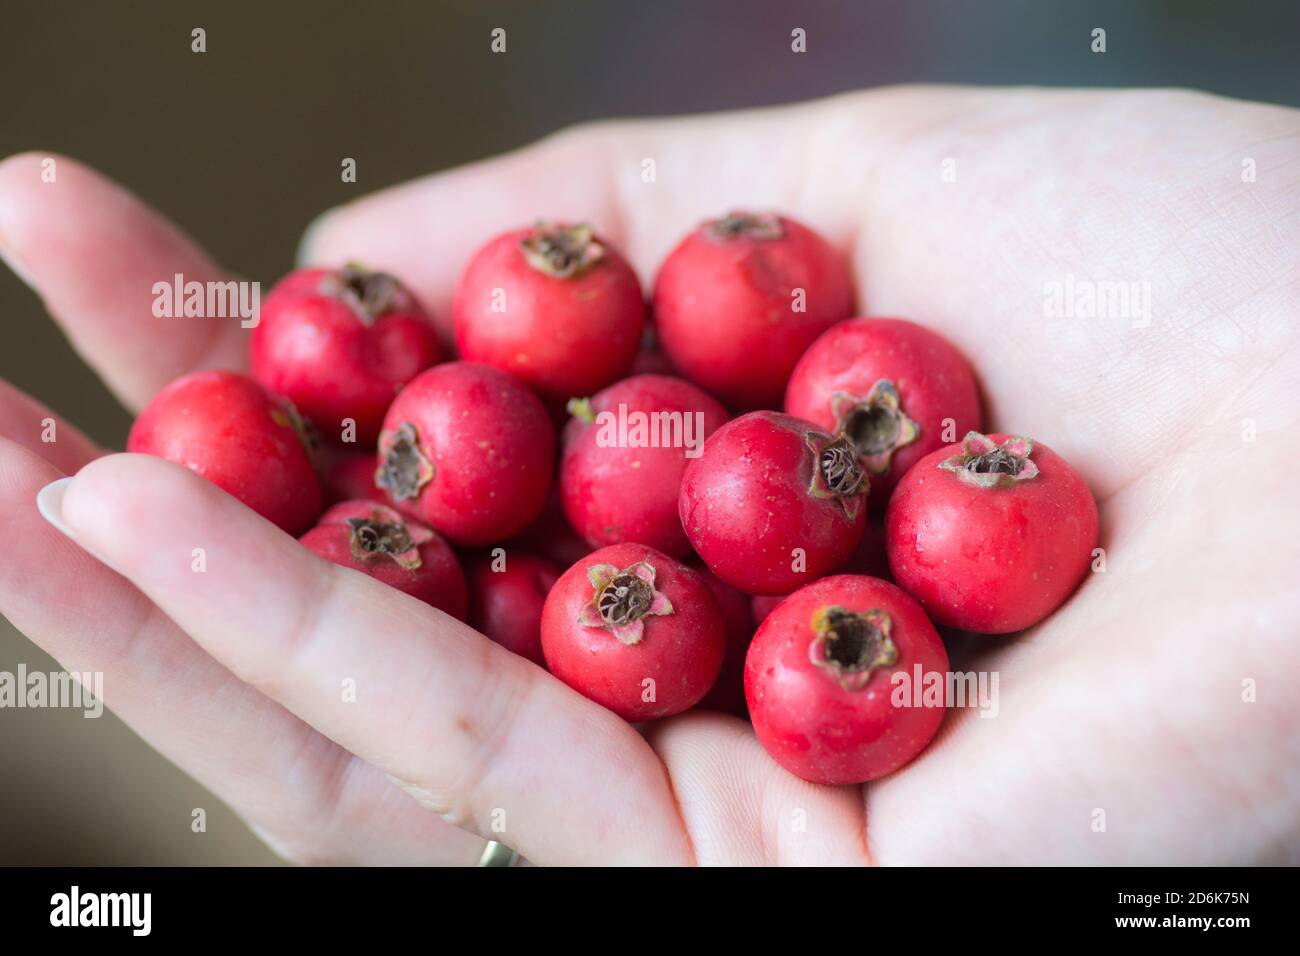 Hand full of red Scarlet Hawthorn fruits (Crataegus coccinea), Stock Photo